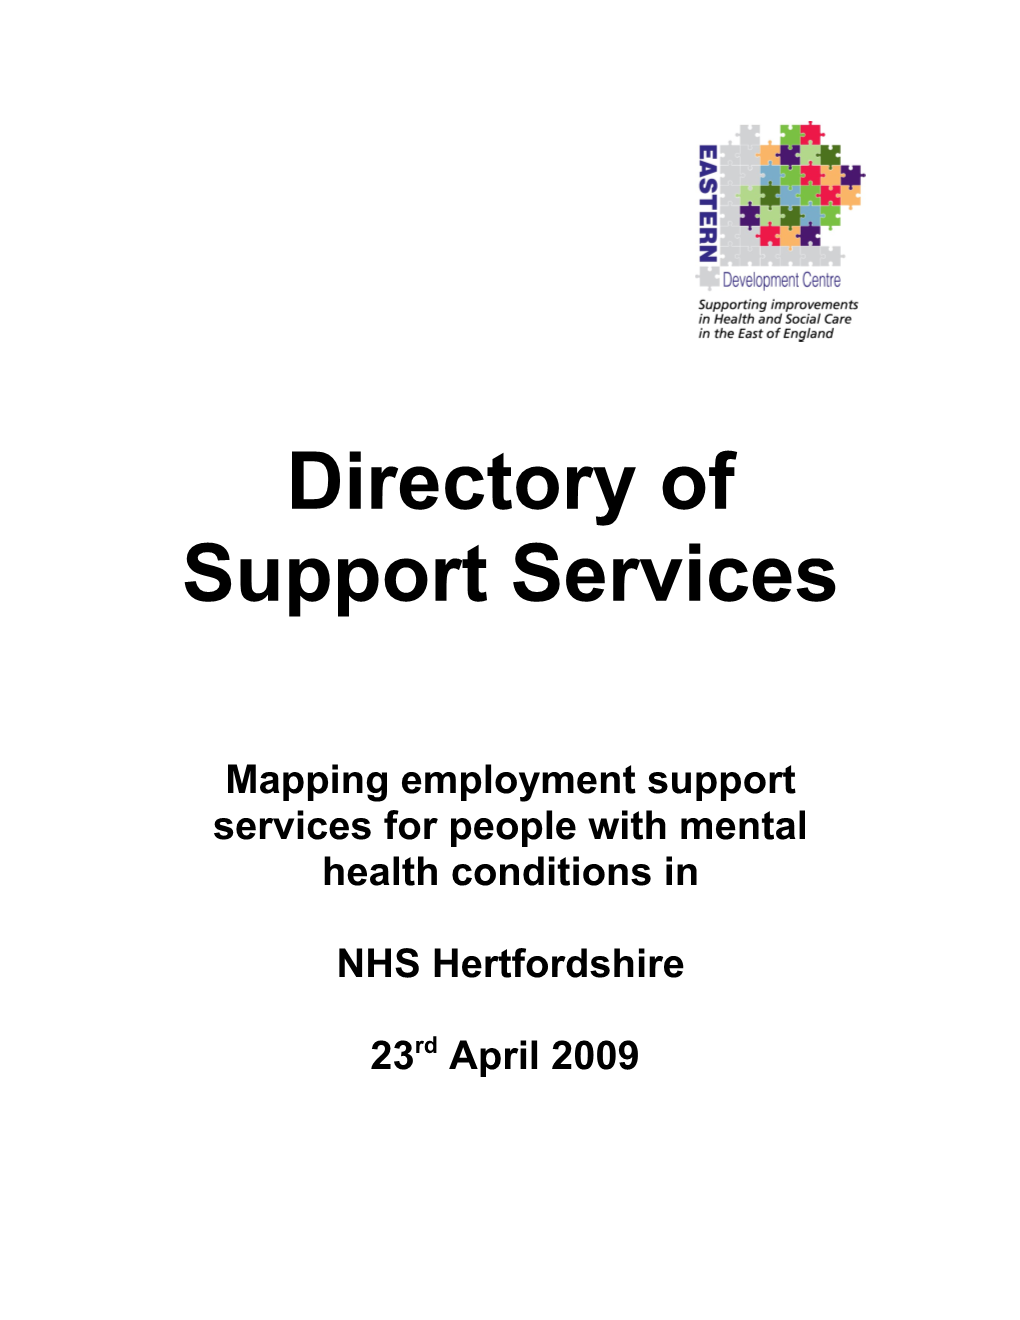 Mapping Employment Support Services for People with Mental Health Conditions In